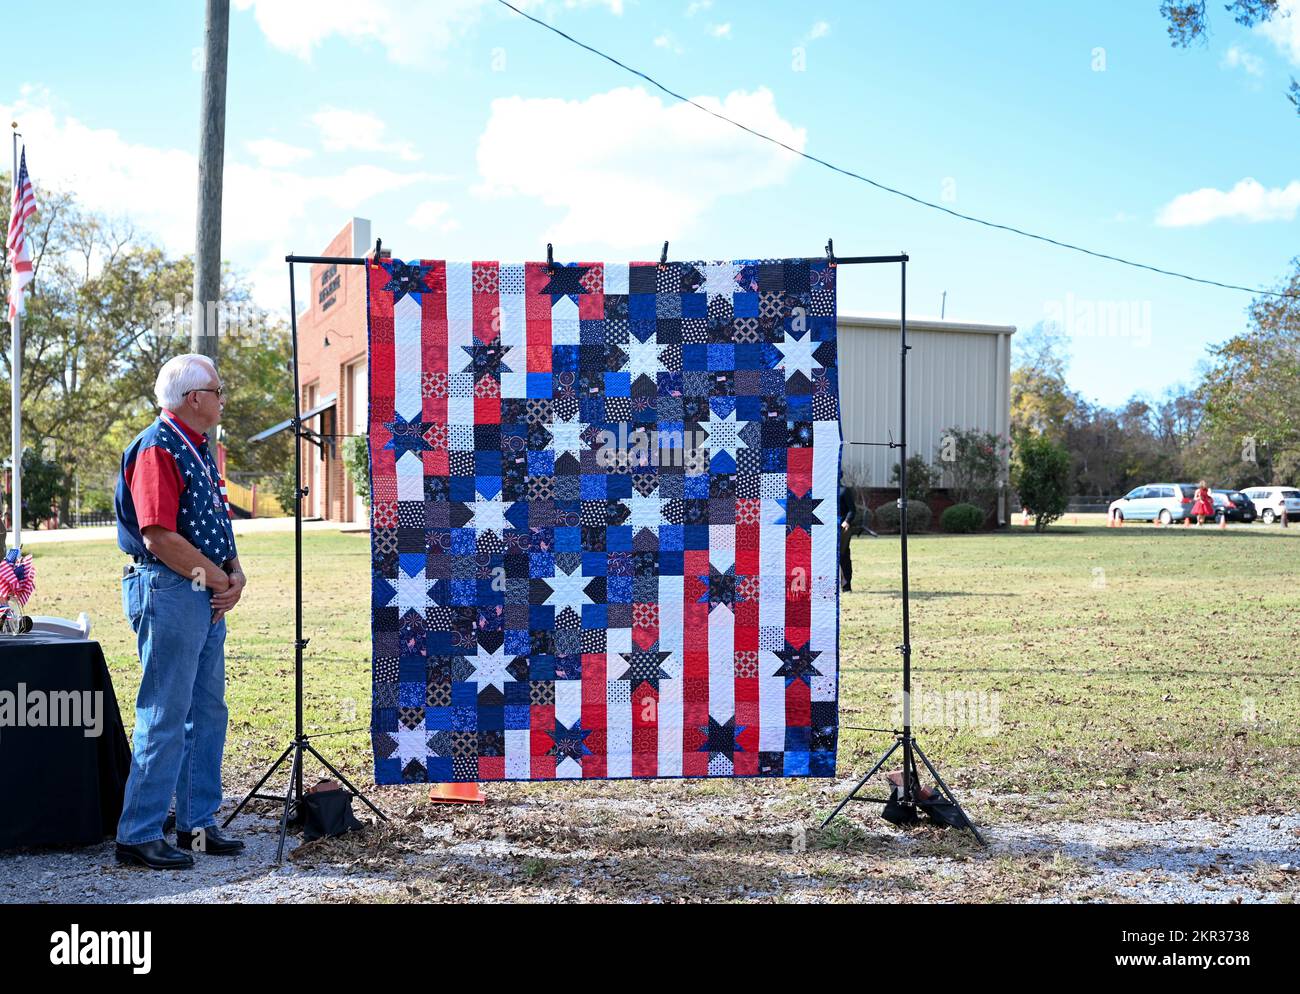 A veteran admires the “Veterans Quilt” at the 11th annual Veterans Appreciation Ceremony in Pike Road, Alabama, Nov. 6, 2022. Provided by the Pike Road Quilters and the Pike Road Arts Council, the honorary quilt is raffled off to a veteran in attendance. Stock Photo